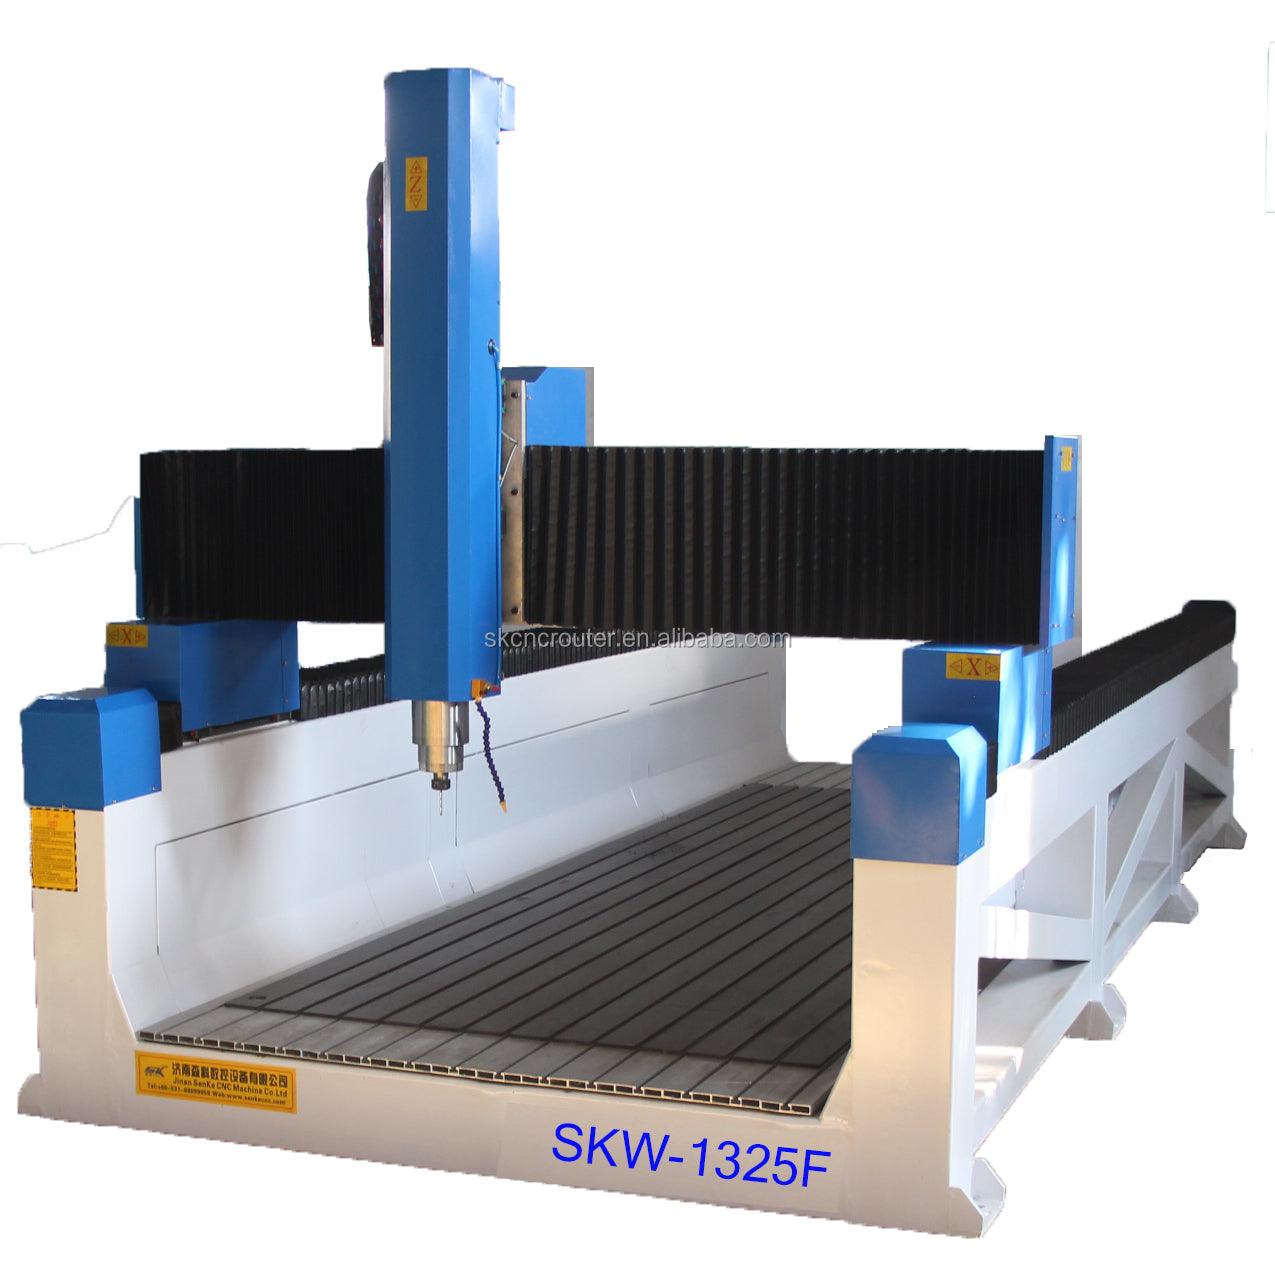 Senke SKW1325F cnc wood+ router machine 3 axis 4 axis for engraving 3D wood 4*8 cnc machine - Antinsky3d